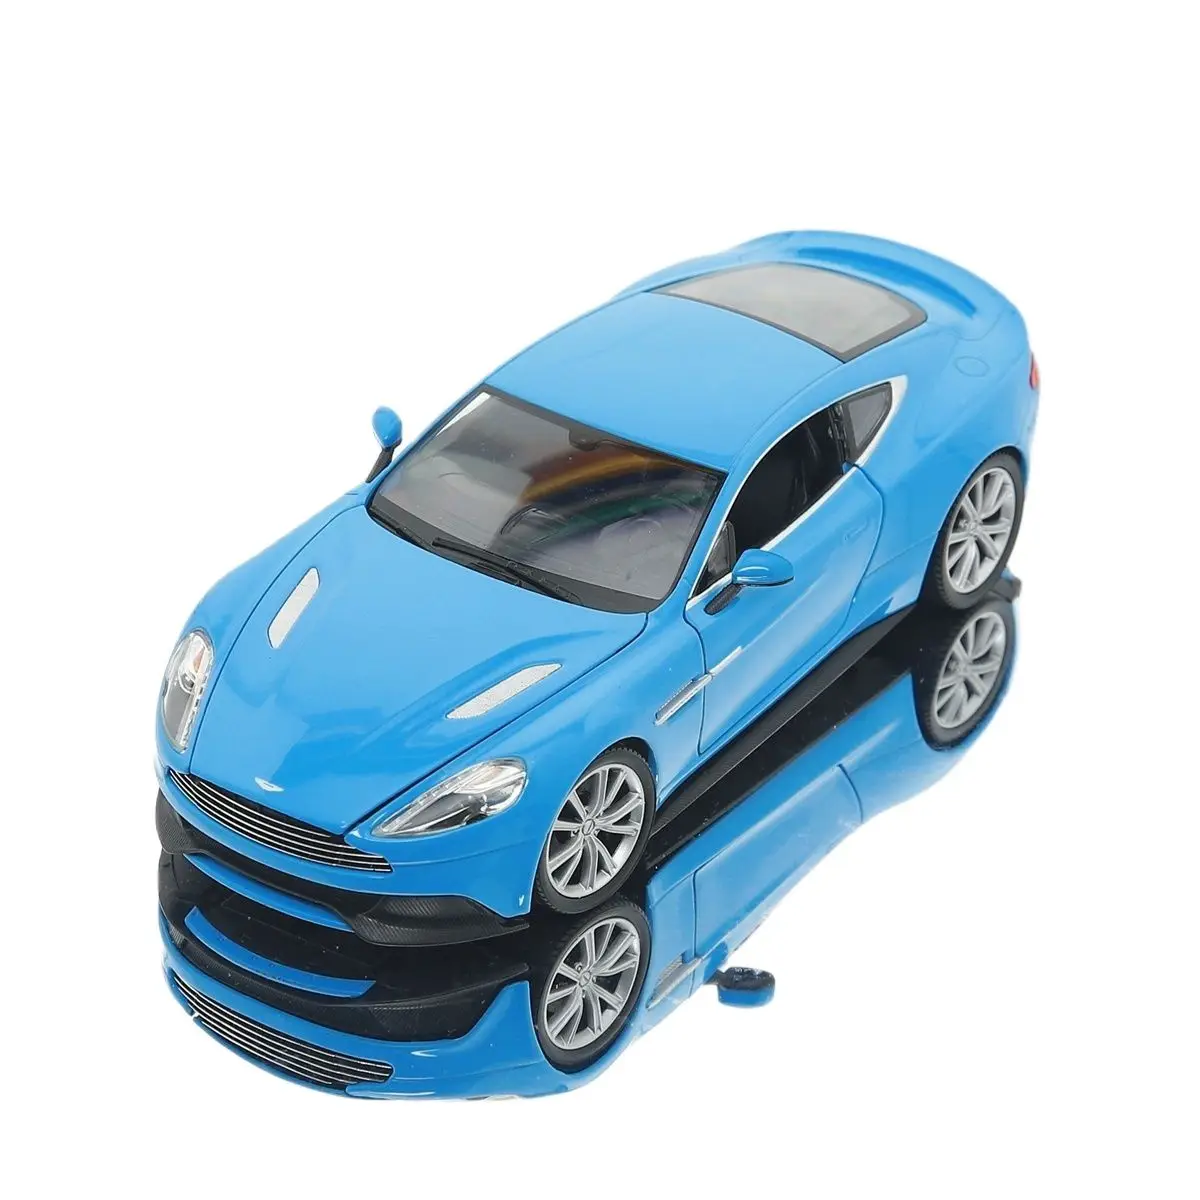 

WELLY 1:24 Aston Martin Vanquish Alloy Diecast Car Model Toy Collection Xmas Gift